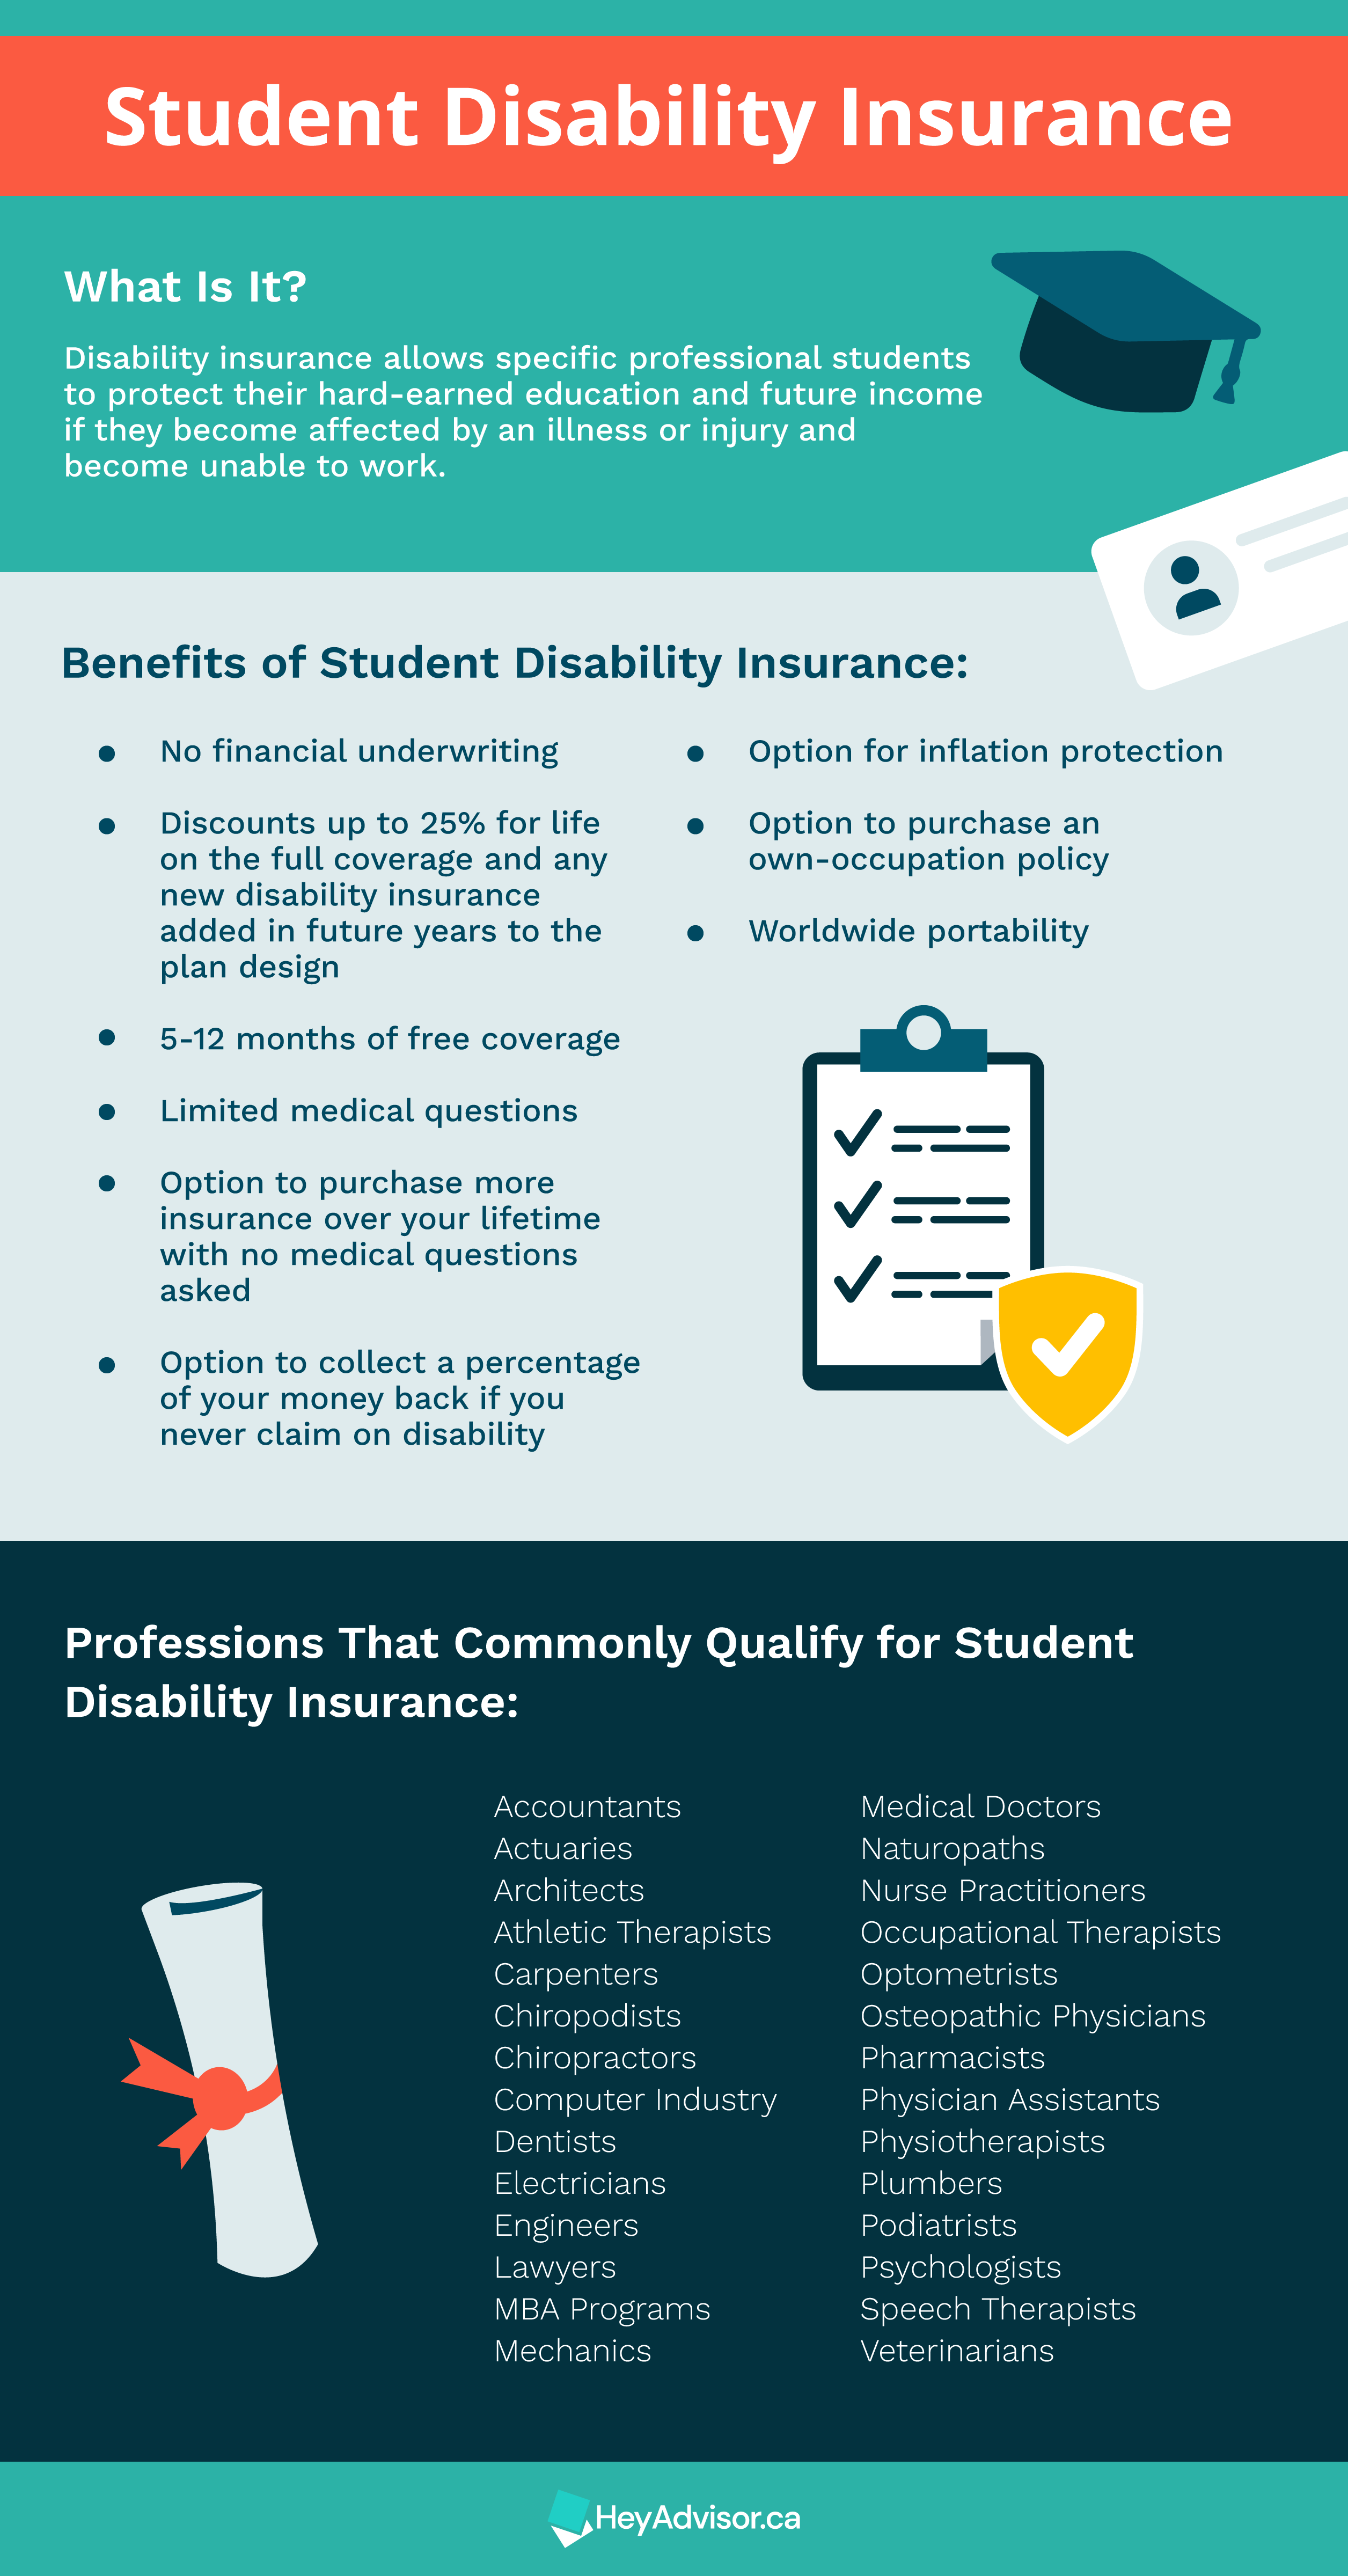 You may qualify for disability insurance without any proof of income